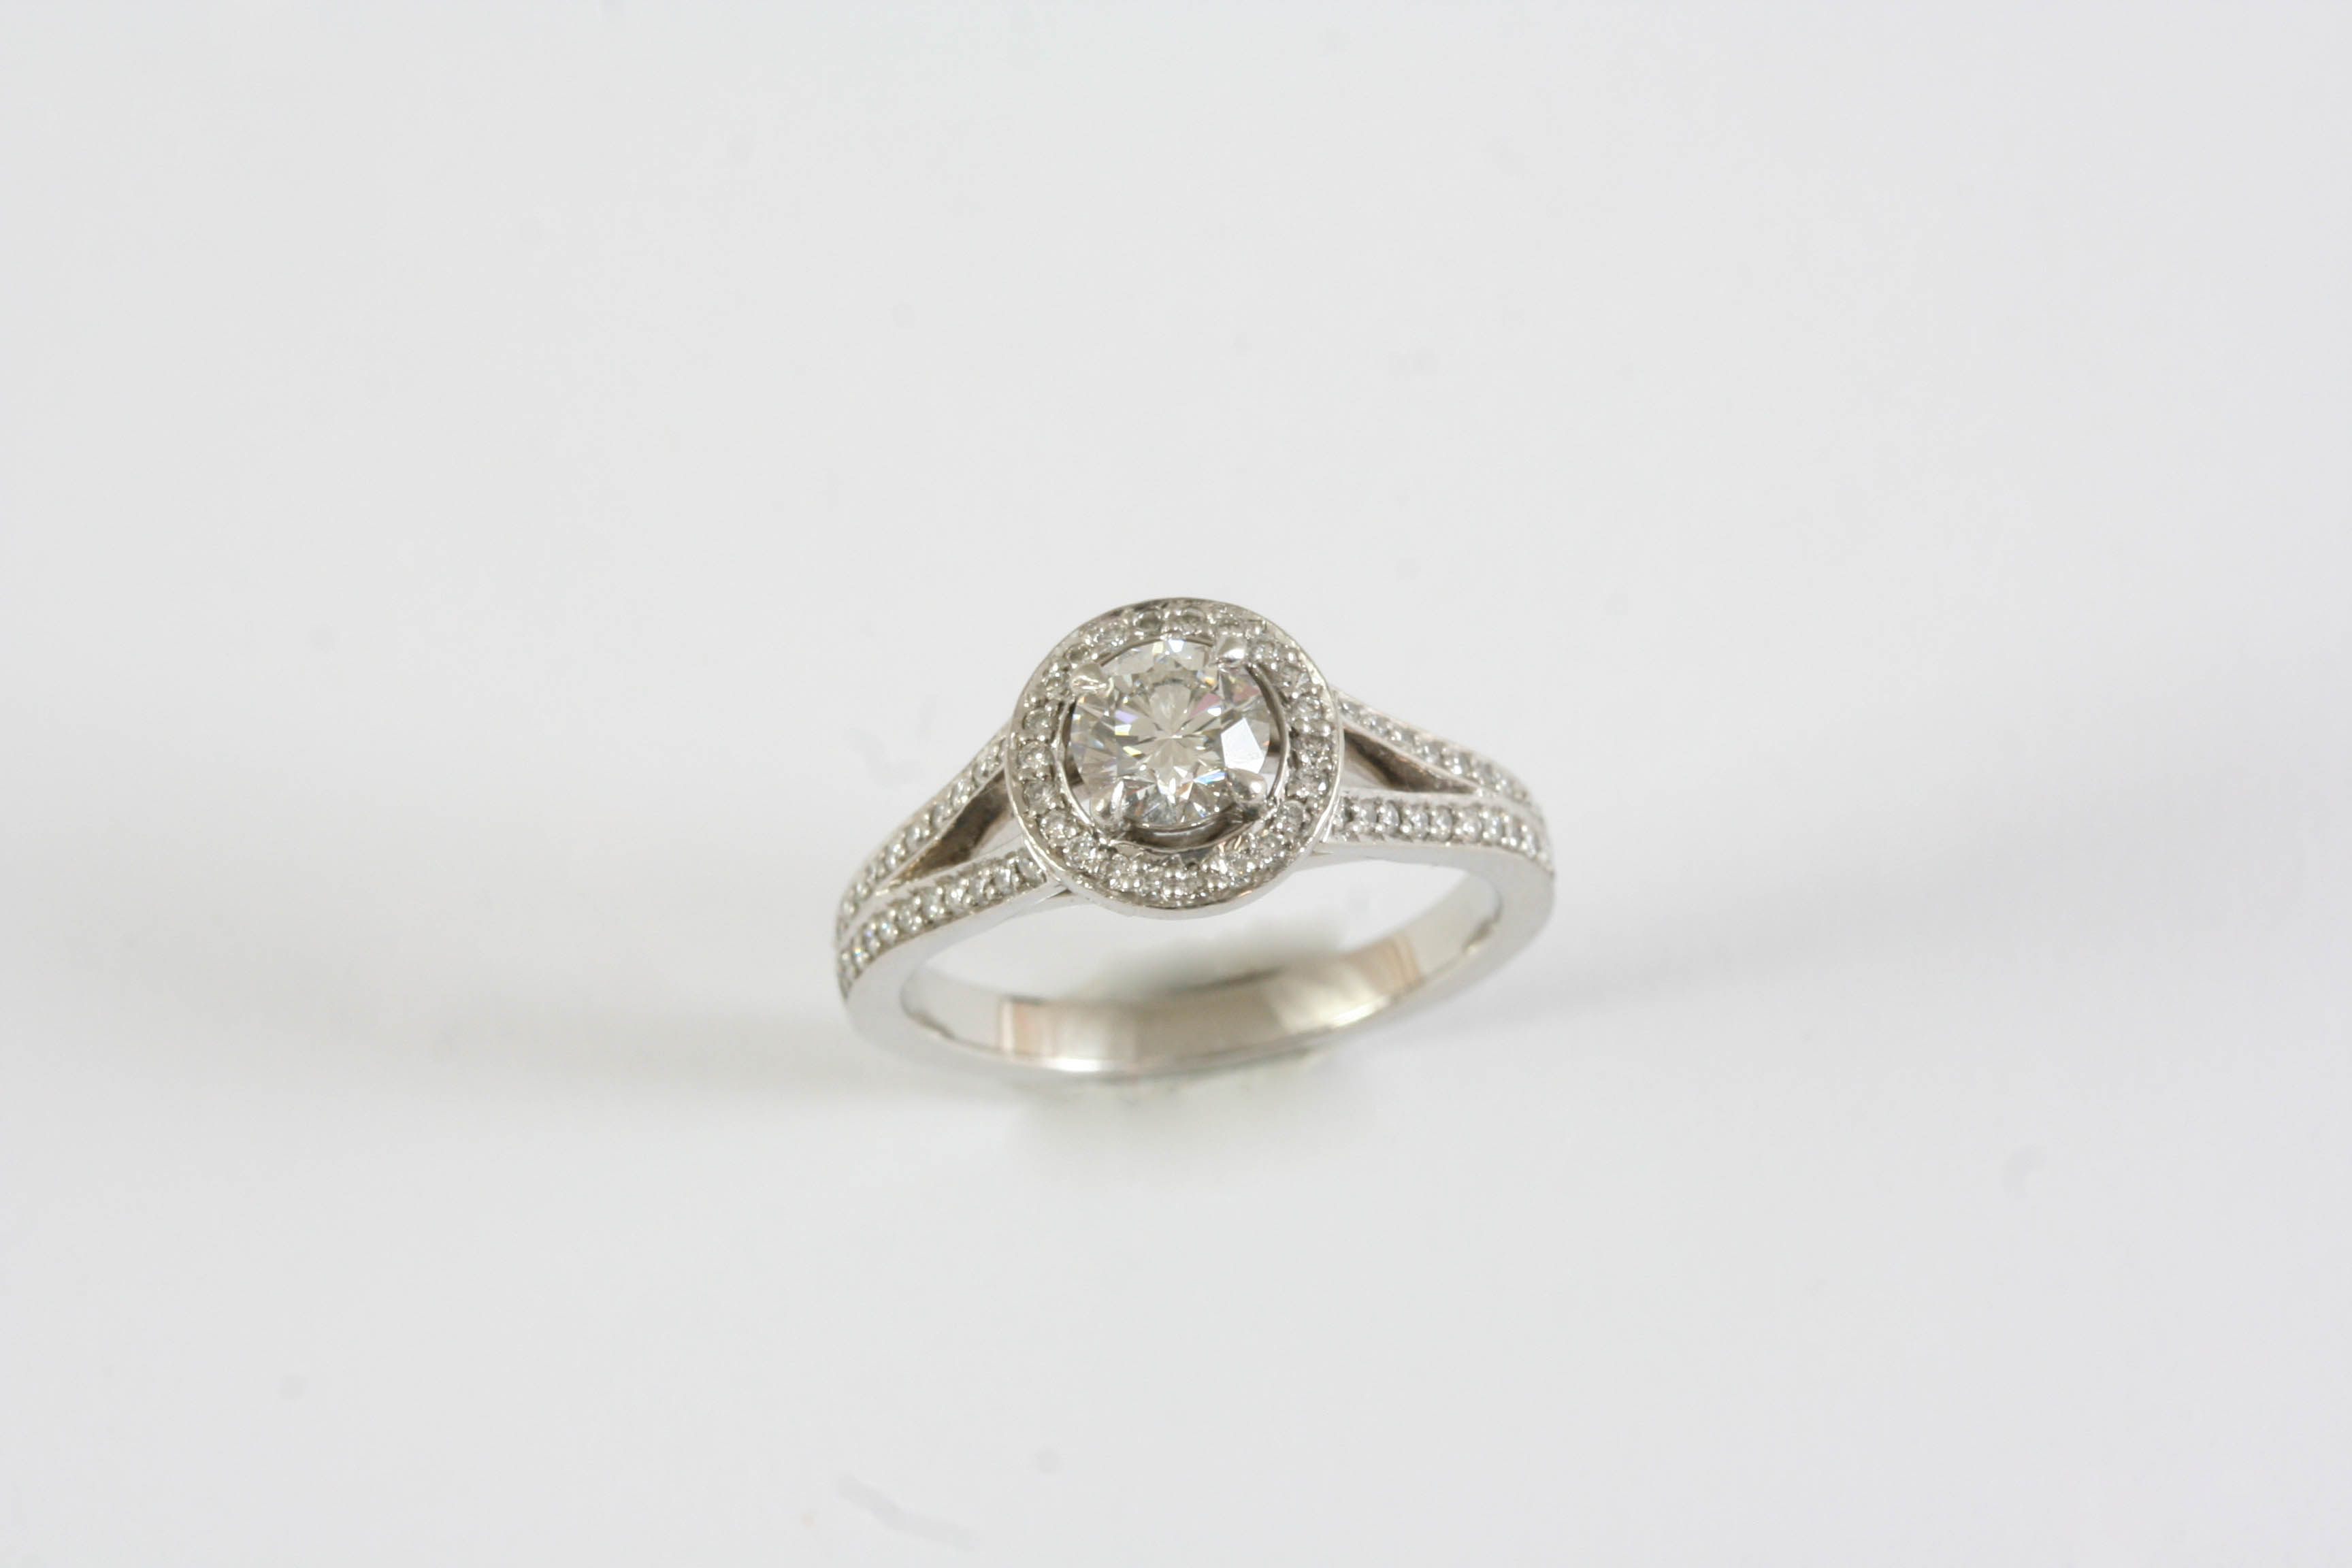 A DIAMOND CLUSTER RING BY MAPPIN & WEBB the round brilliant-cut diamond is set within a surround